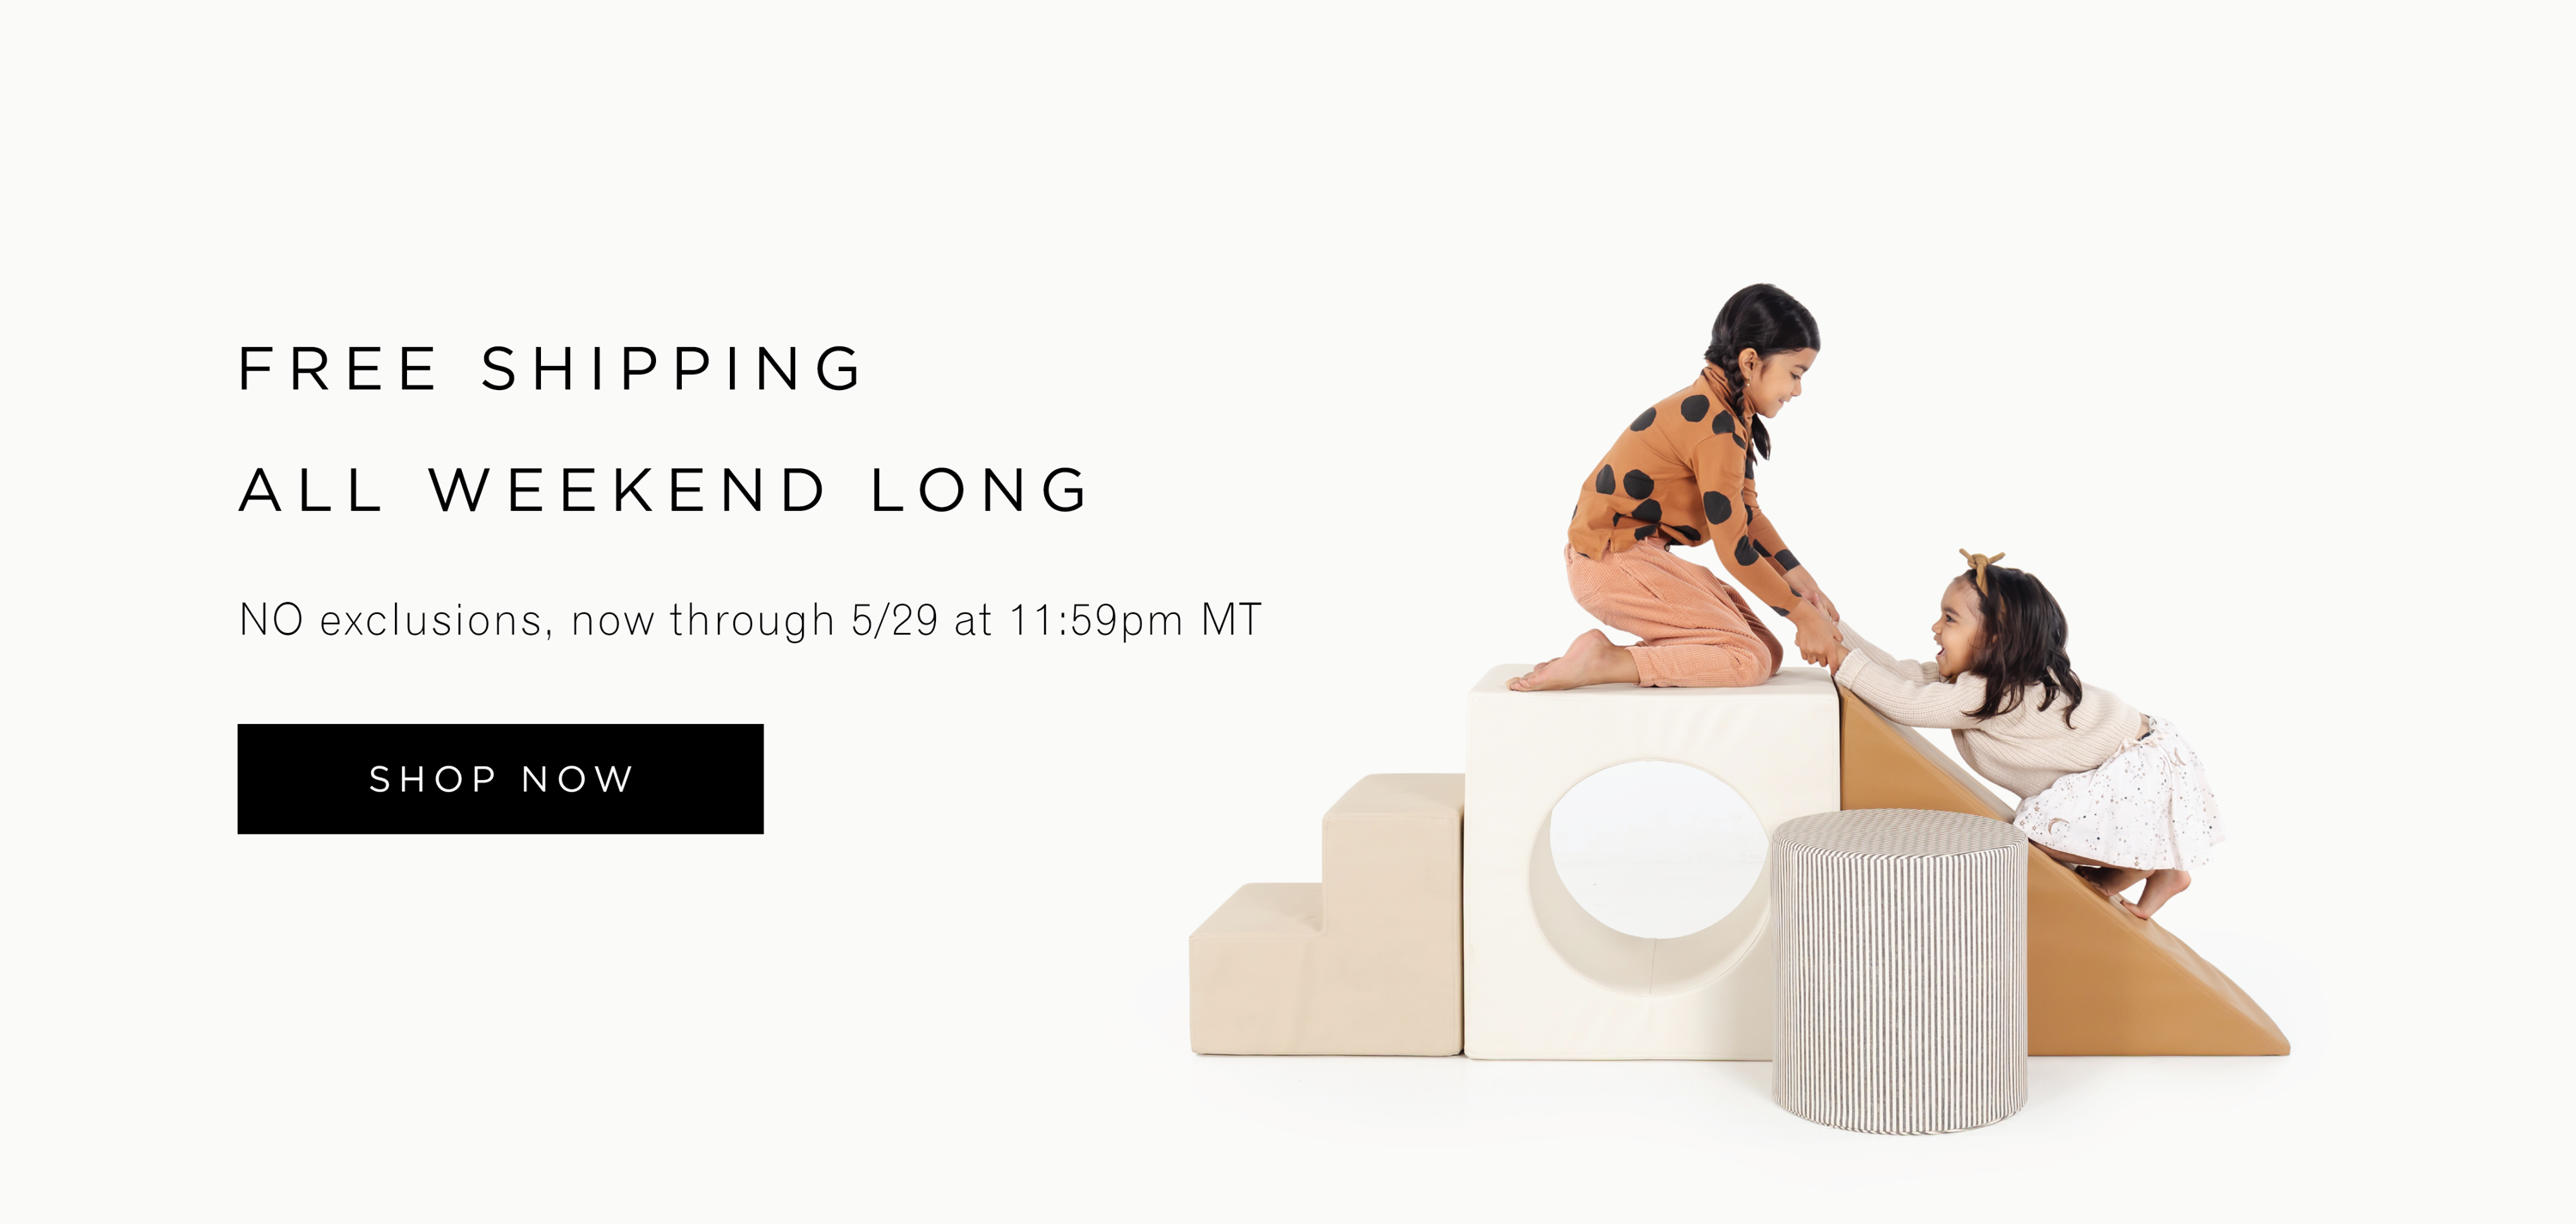 Free Shipping All Weekend Long. No Exclusions, no through 5/29 at 11:59pm MT. SHOP NOW